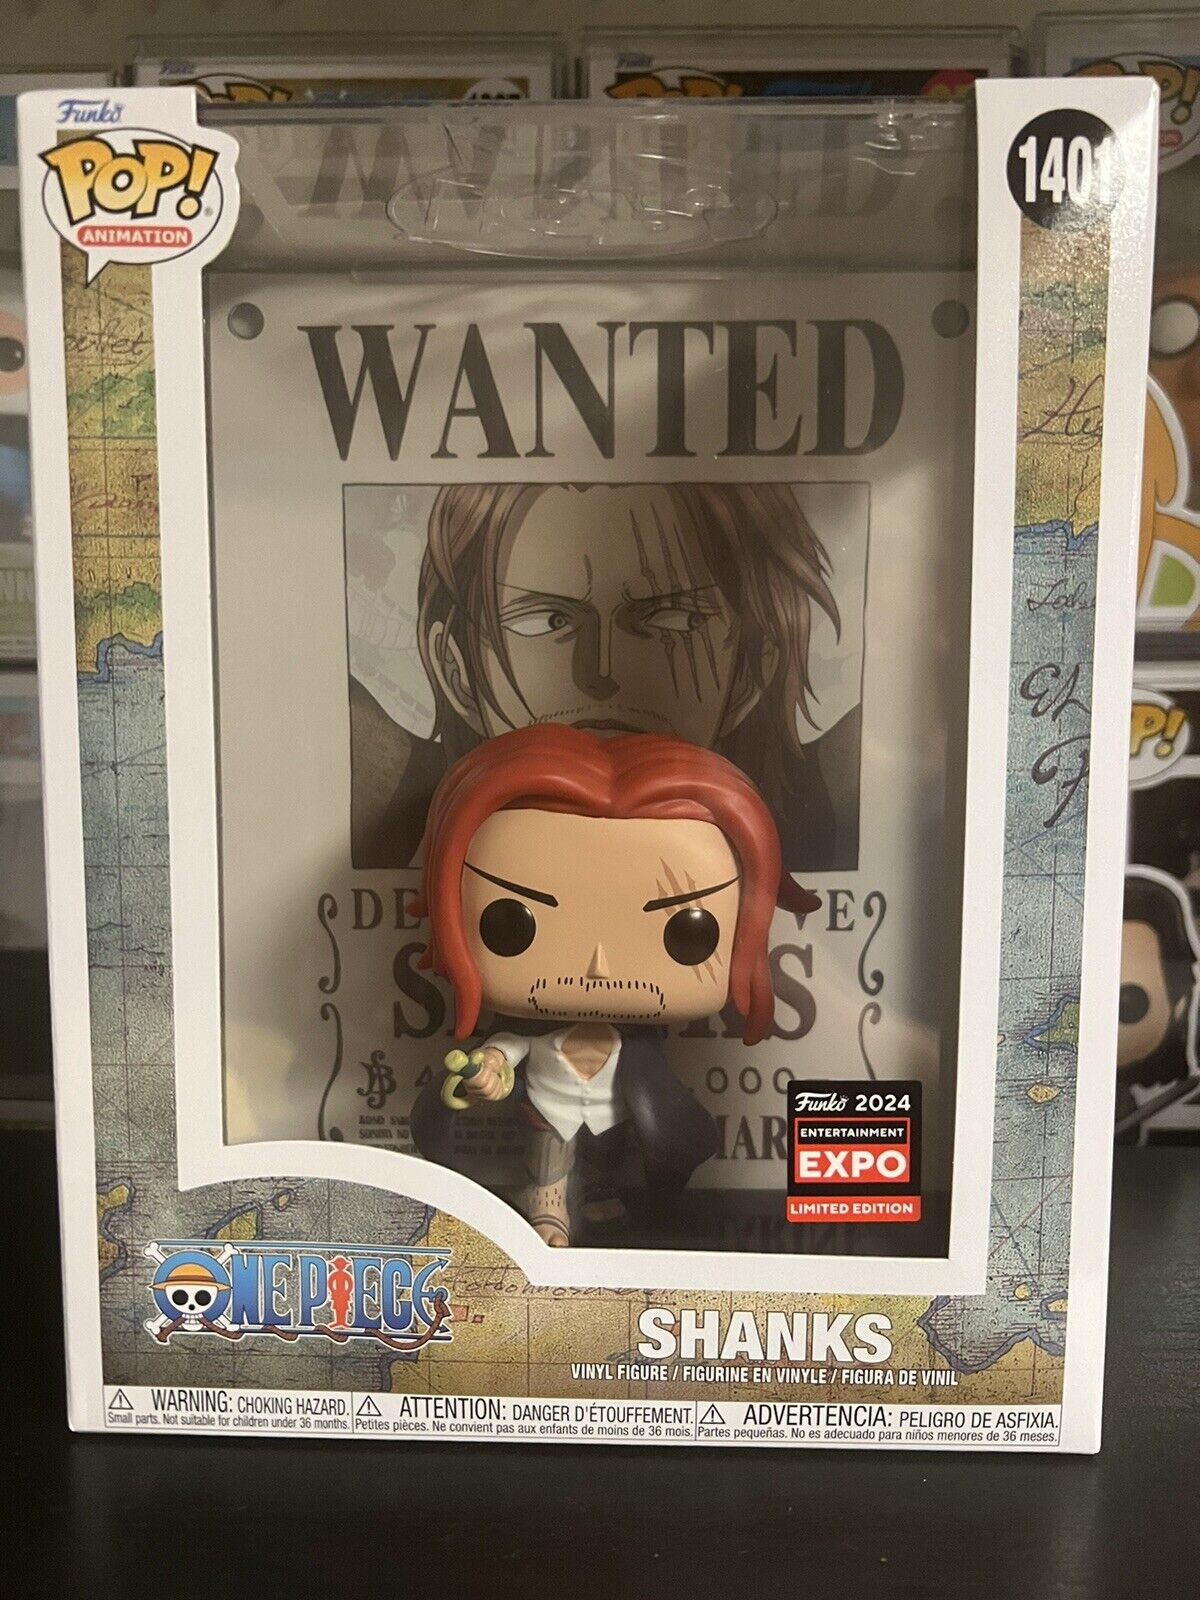 C2E2 SHARED EXPO STICKER Shanks Wanted Poster #1401 Funko Pop One Piece